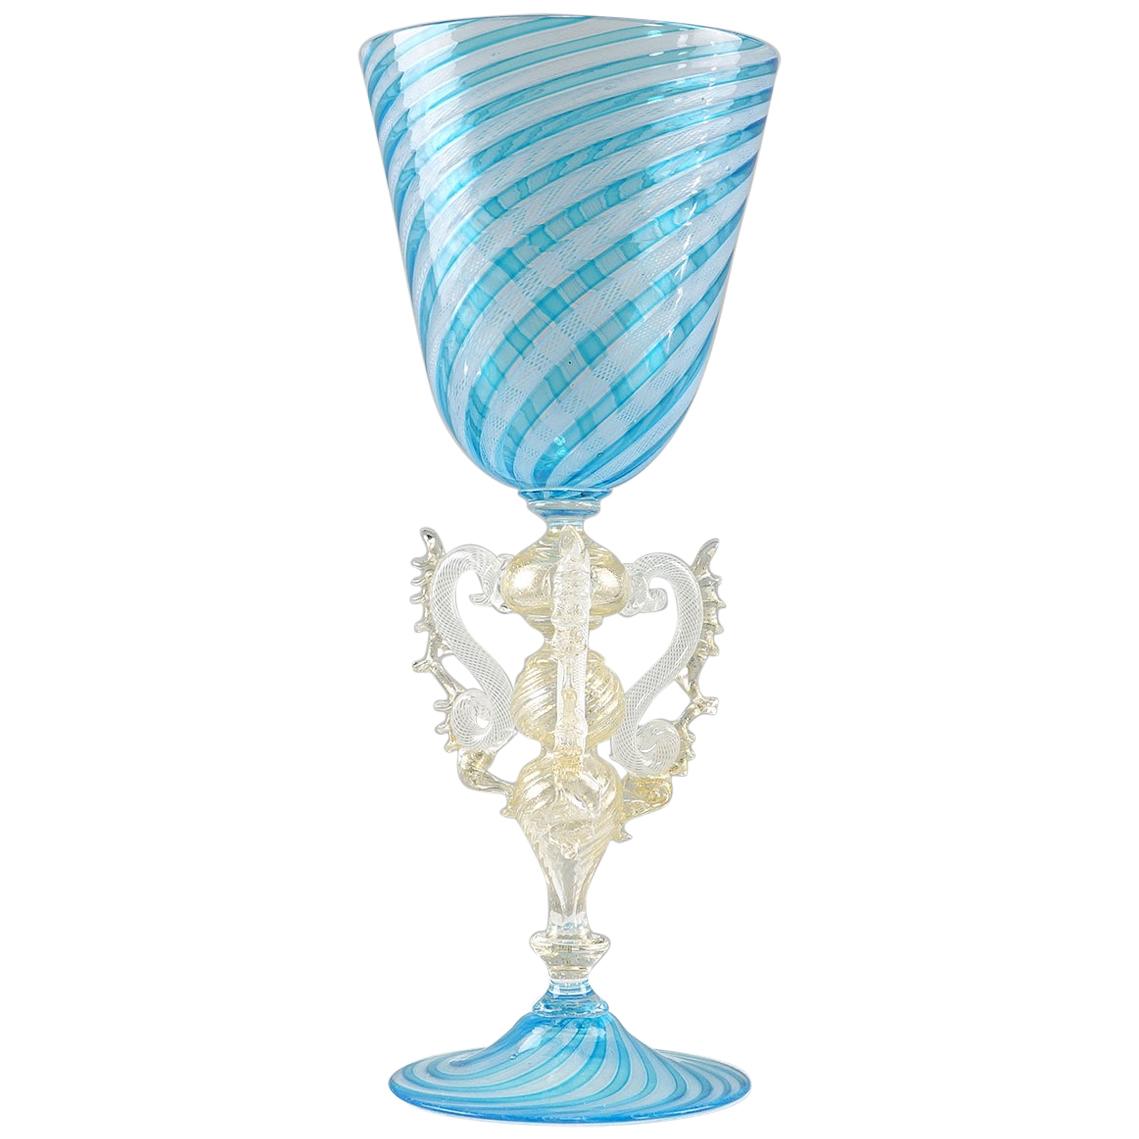 Extraordinary Wonderful Giant Venetian Collector's Glass of Barovier Toso